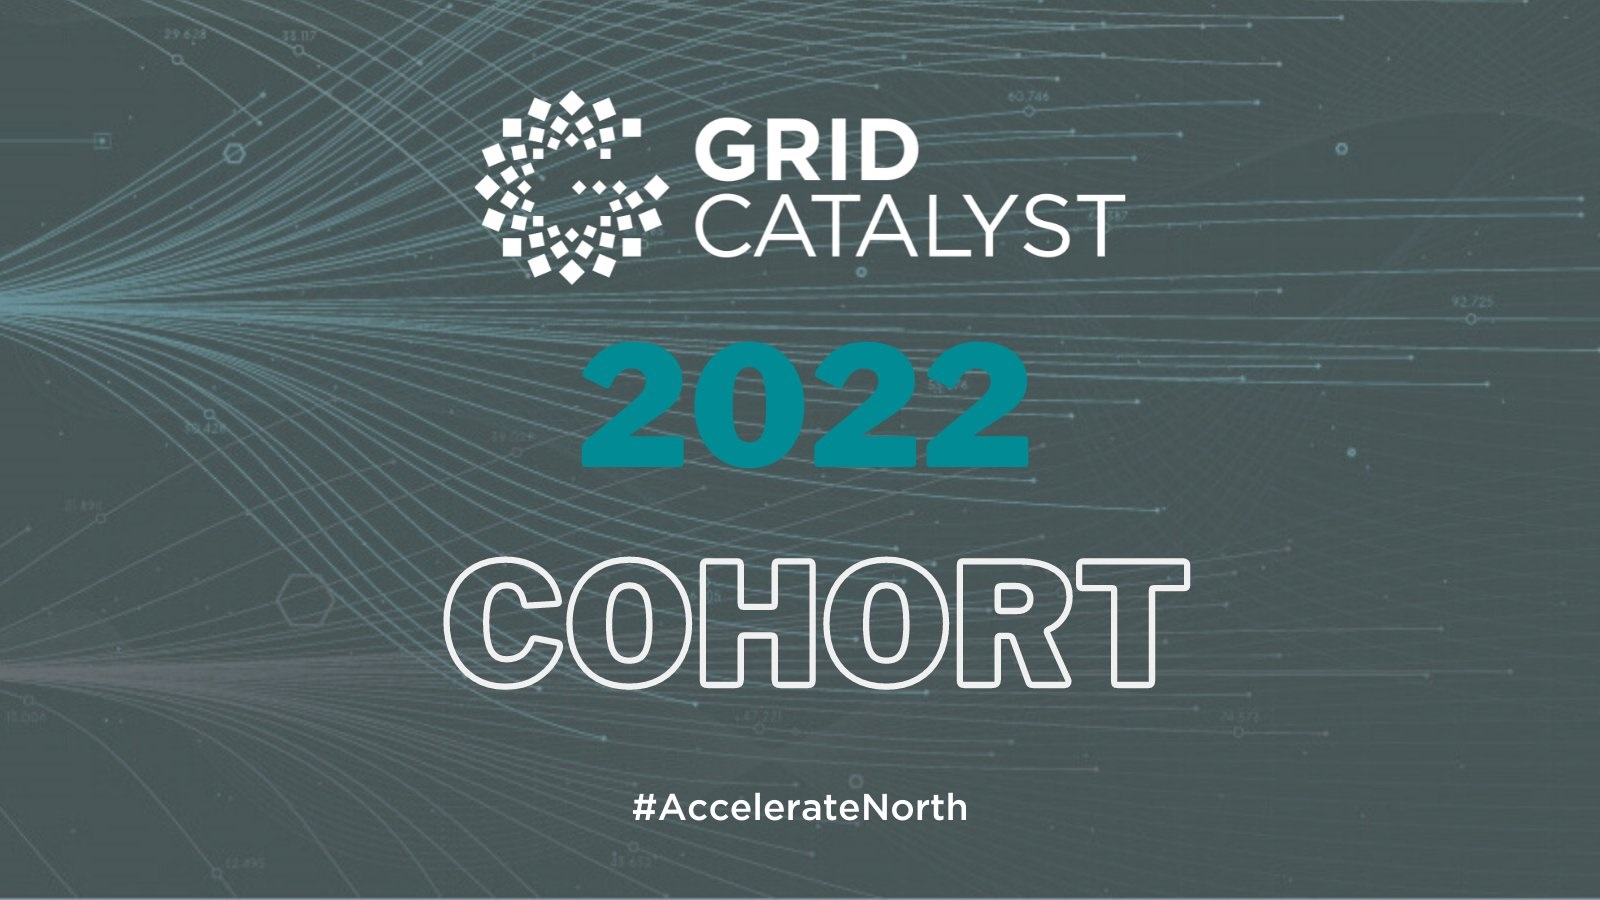 Grid Catalyst Announces First Energy Startup Cohort